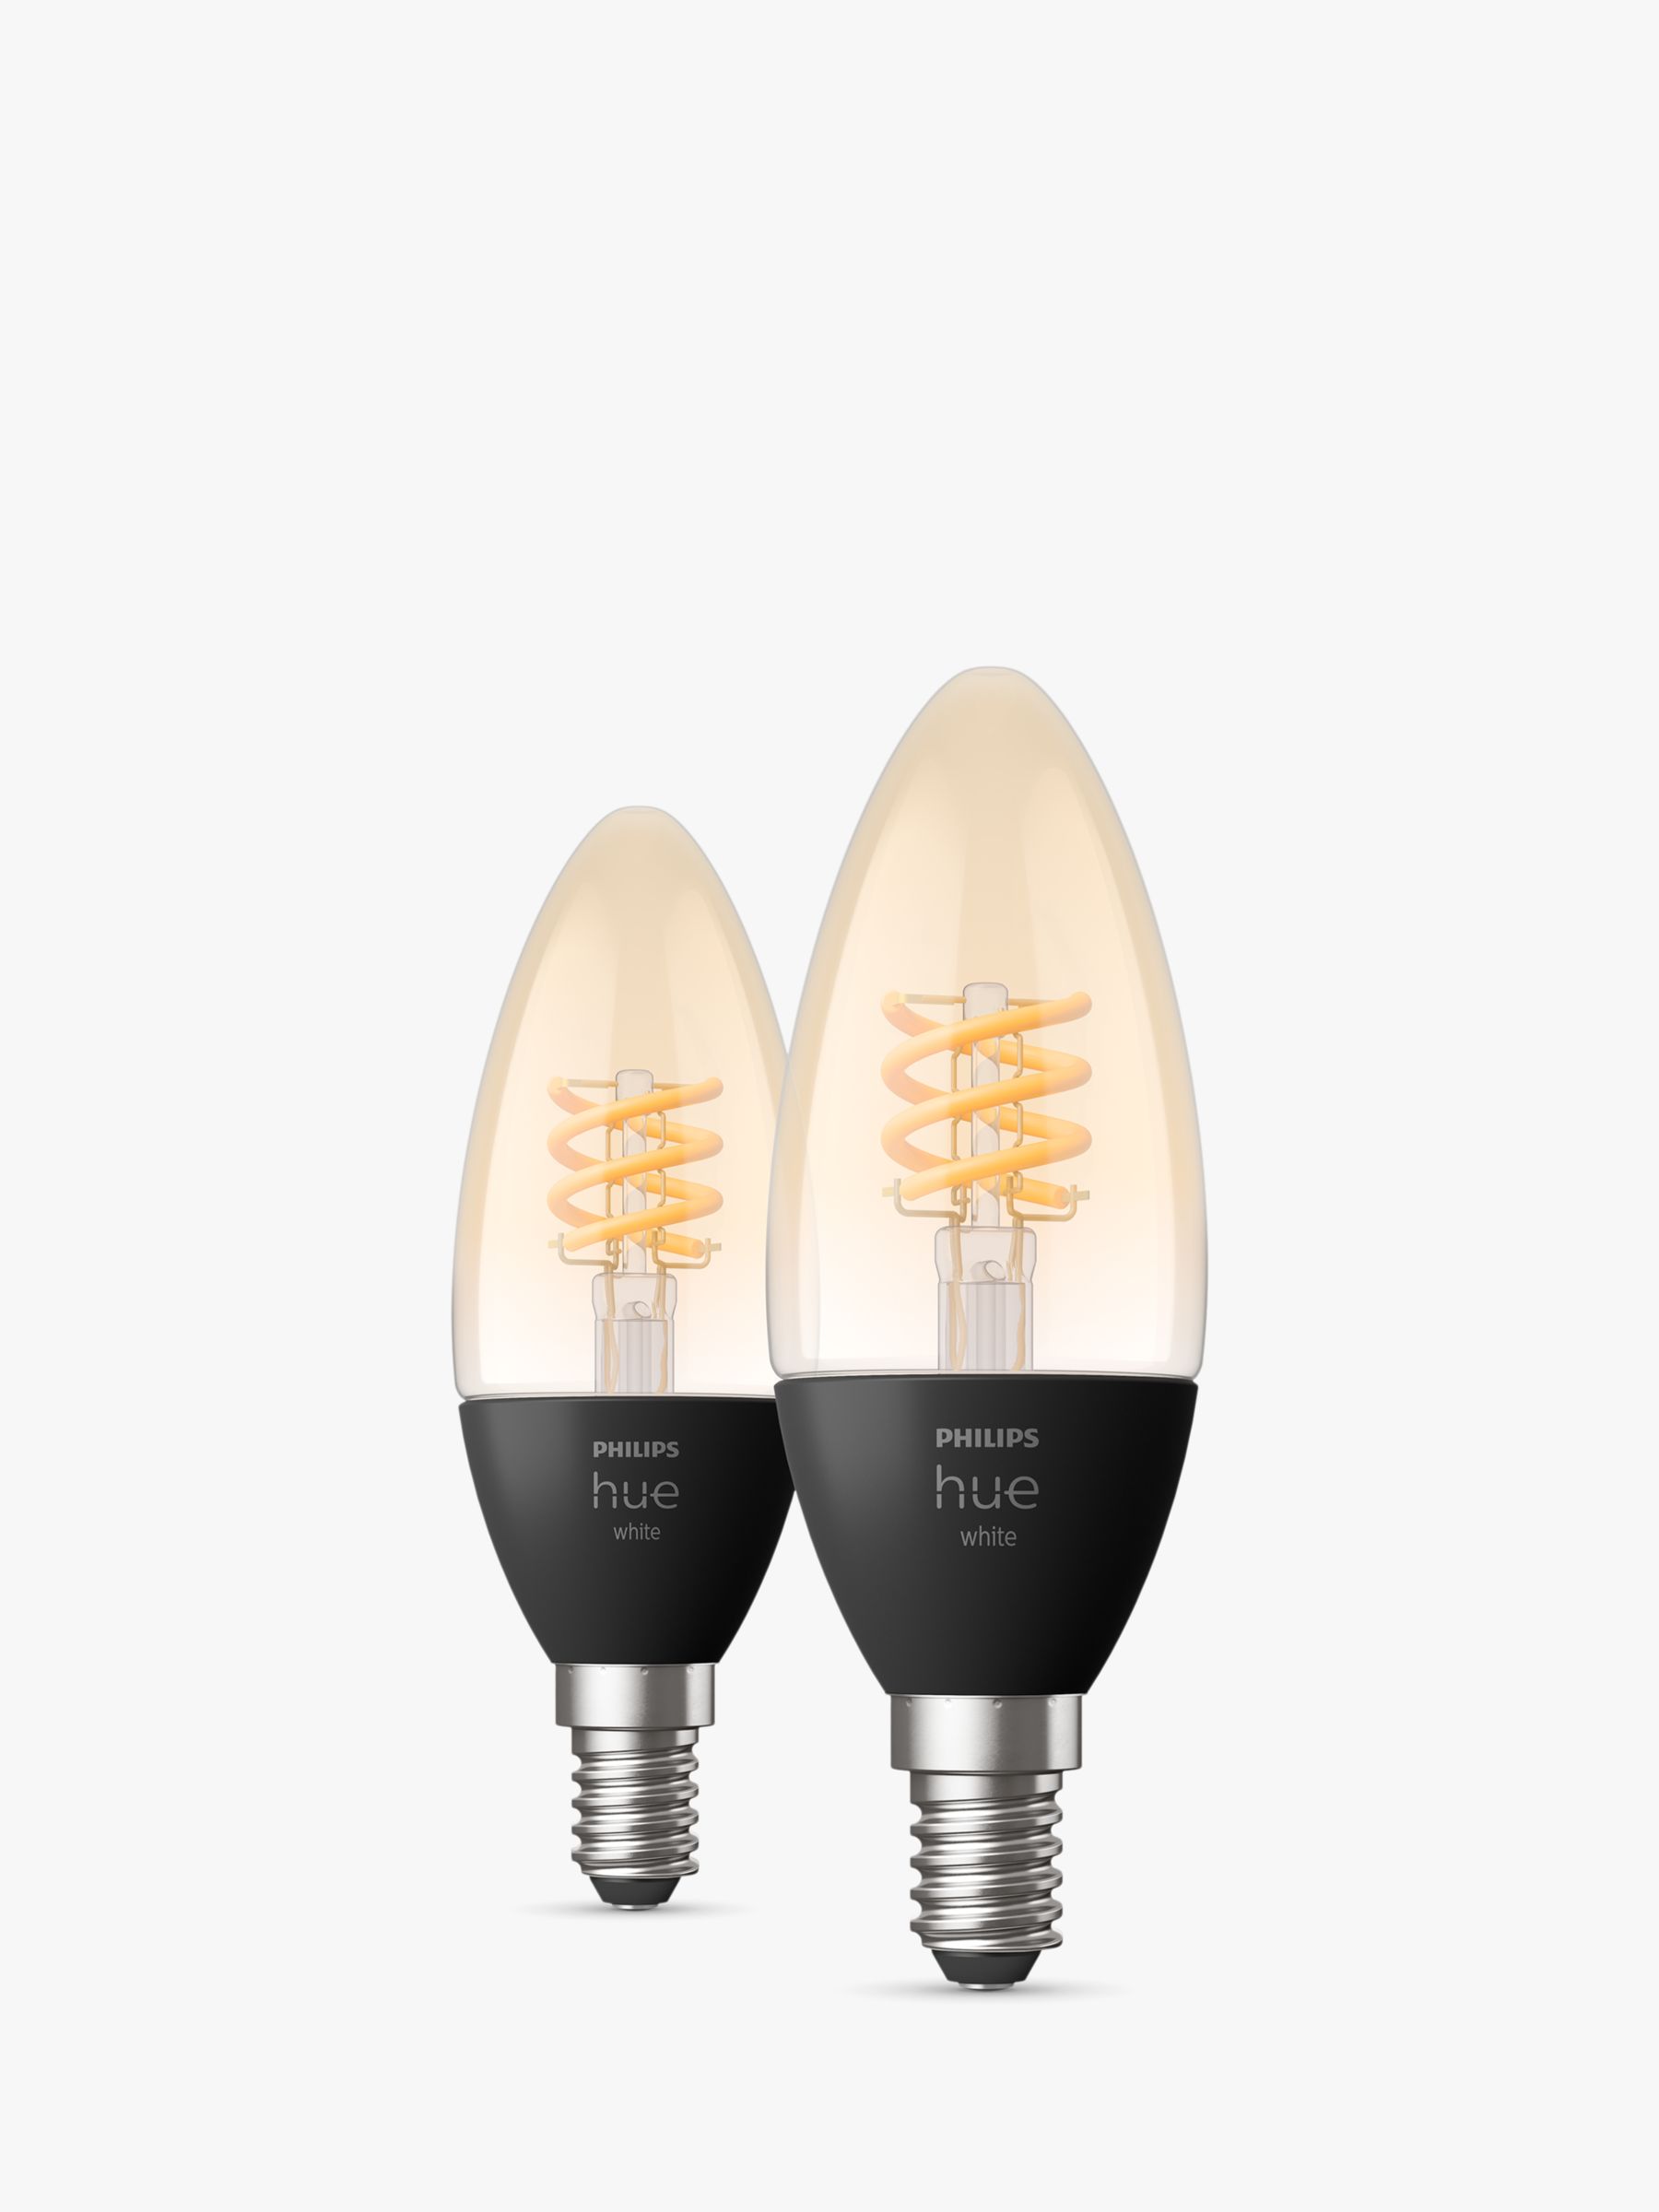 Photo of Philips hue white 4.5w e14 led single filament dimmable smart bulbs with bluetooth set of 2